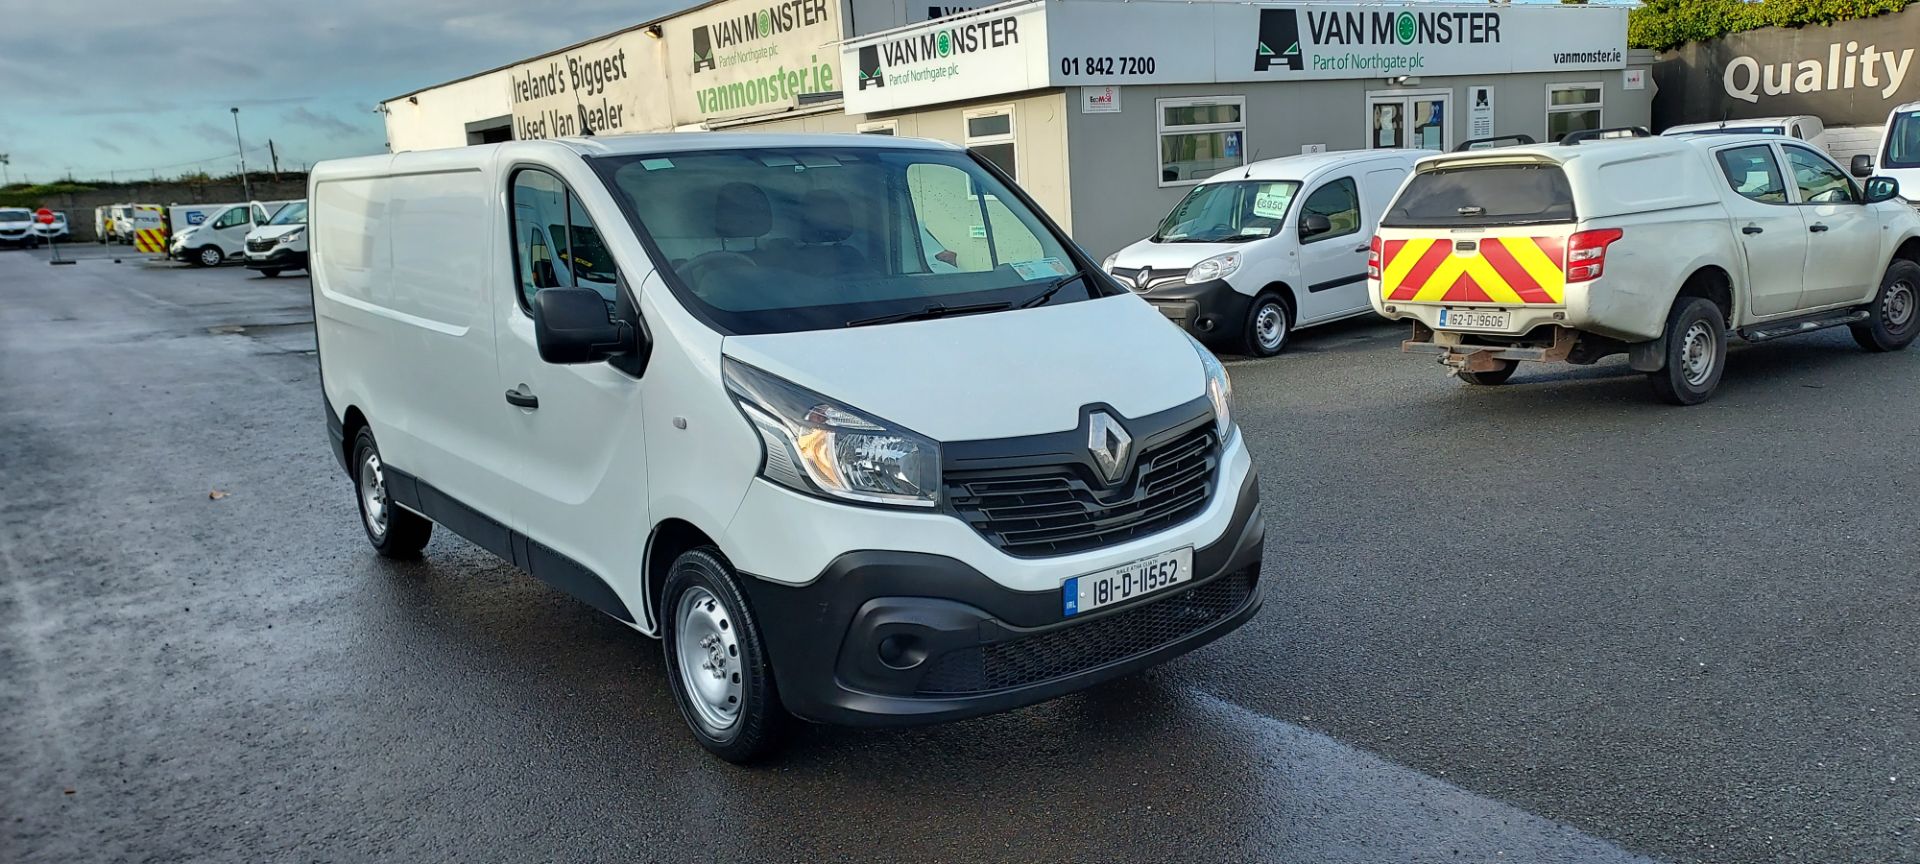 2018 Renault Trafic LL29 DCI 120 Business 3DR (181D11552)